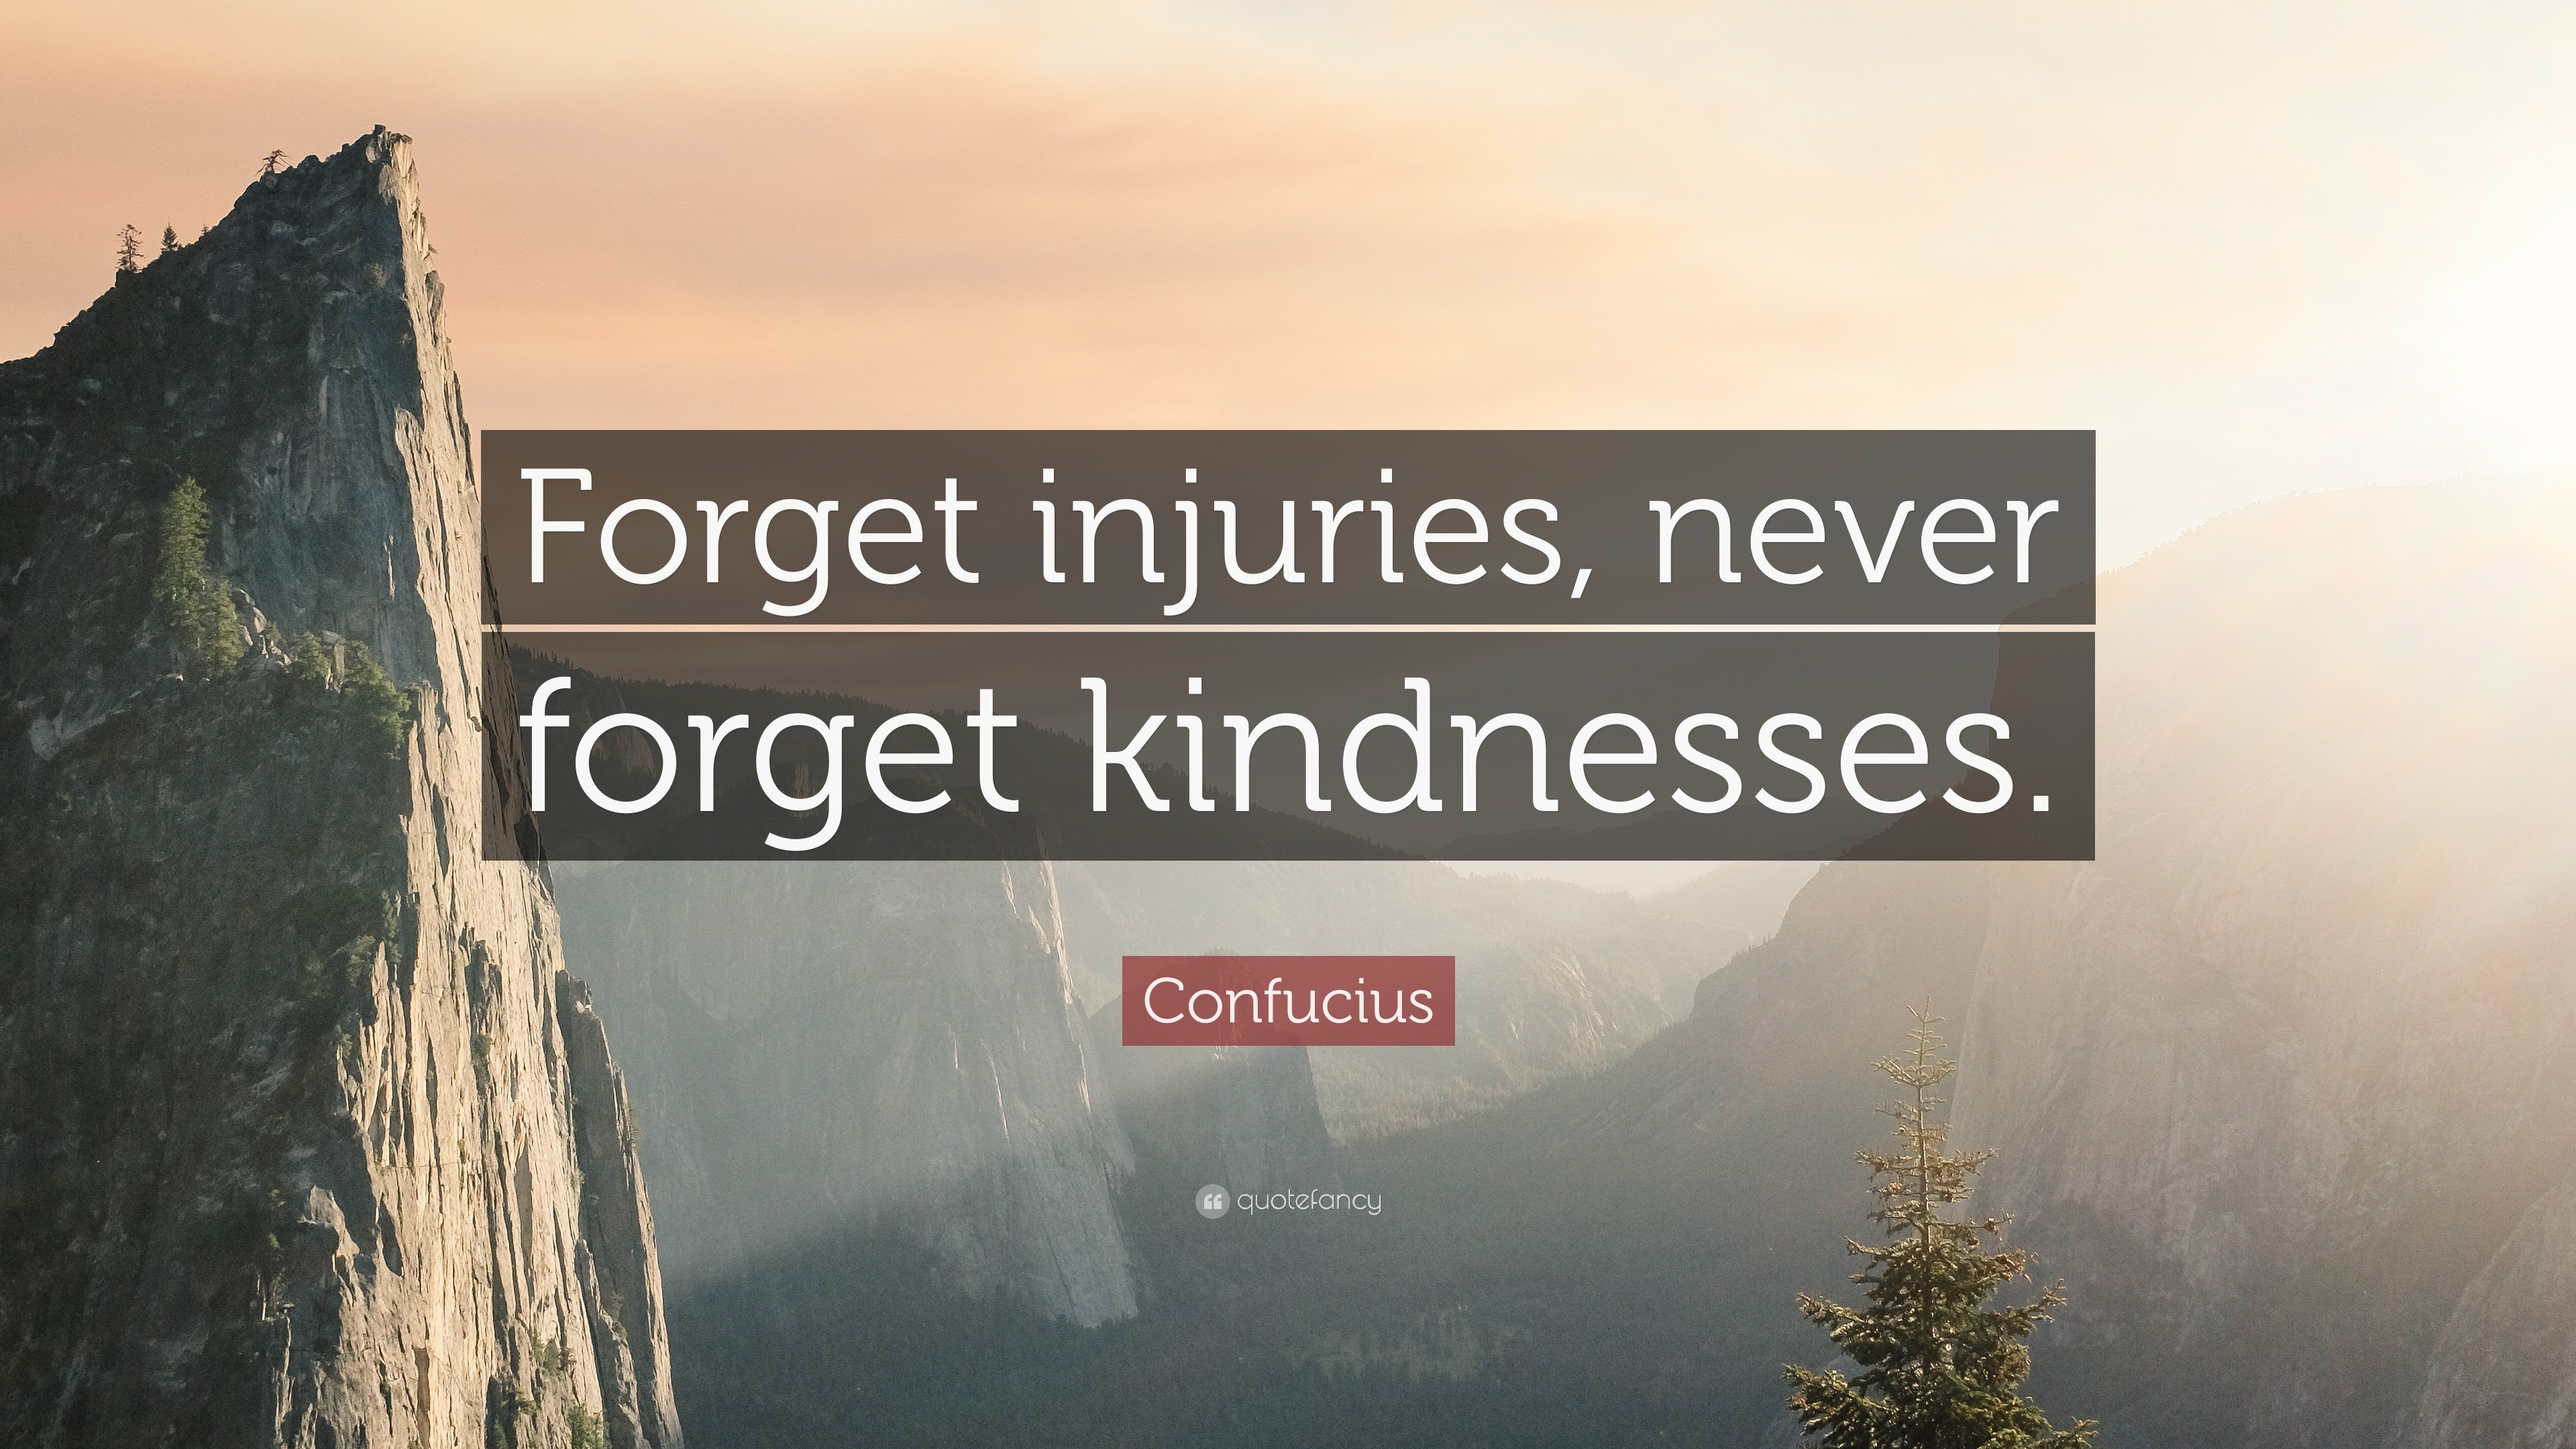 Confucius Quote: “Forget injuries, never forget kindnesses.” (15